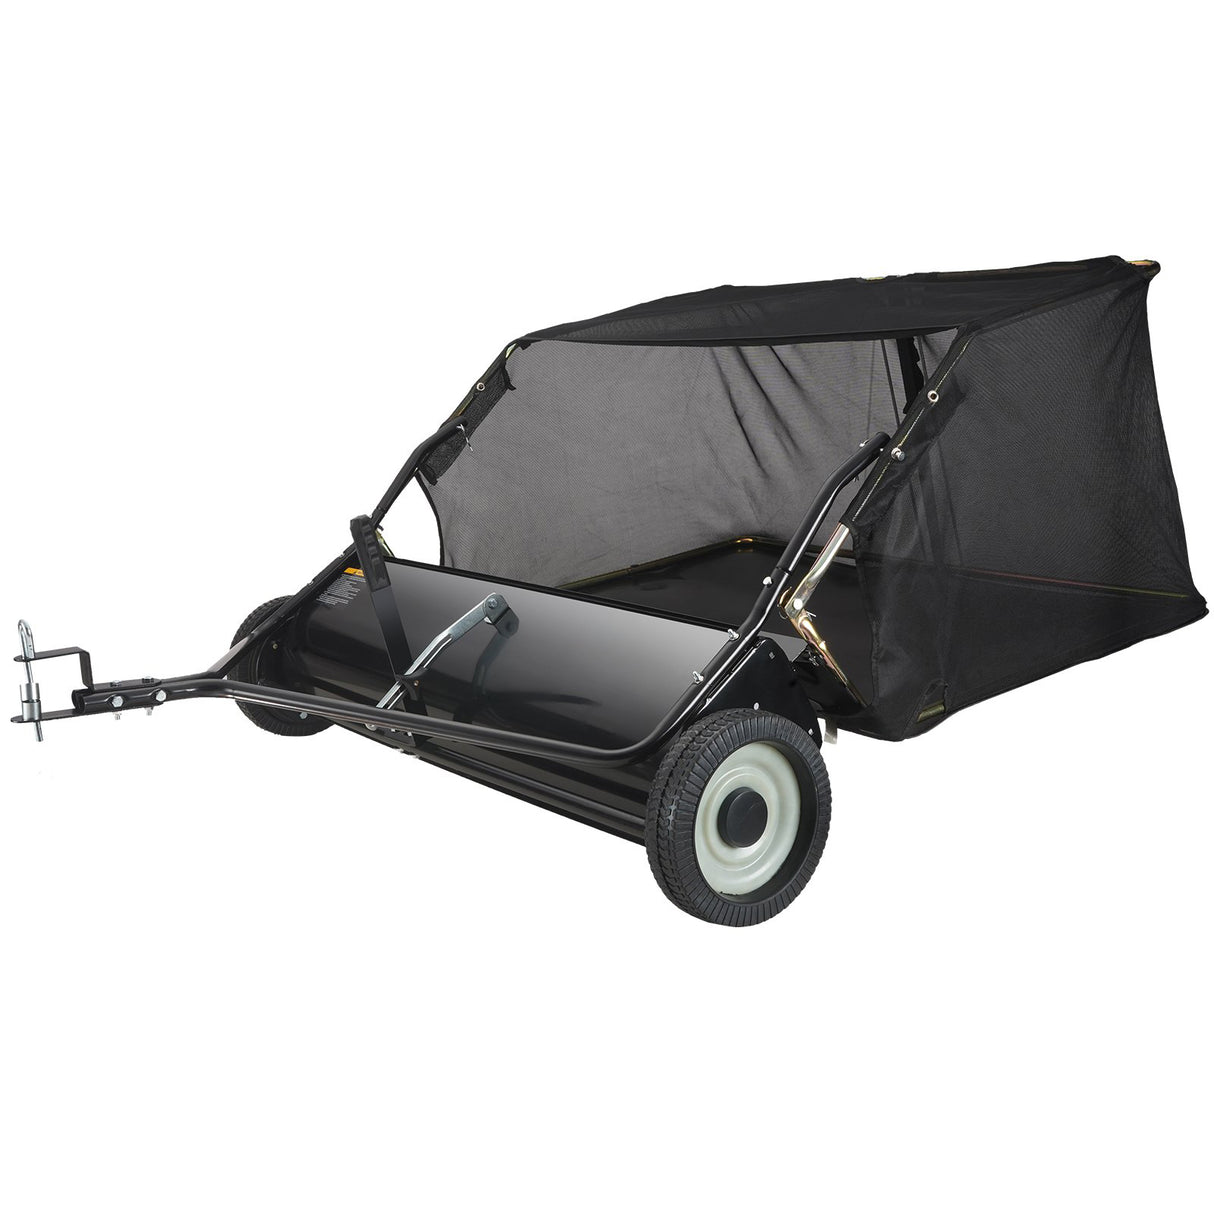 Tow Behind Lawn Sweeper 42.5 Inch, 25 cu. ft Large Capacity Heavy Duty Leaf & Grass Collector with Adjustable Sweeping Height, Dumping Rope Design for Picking Up Debris and Grass